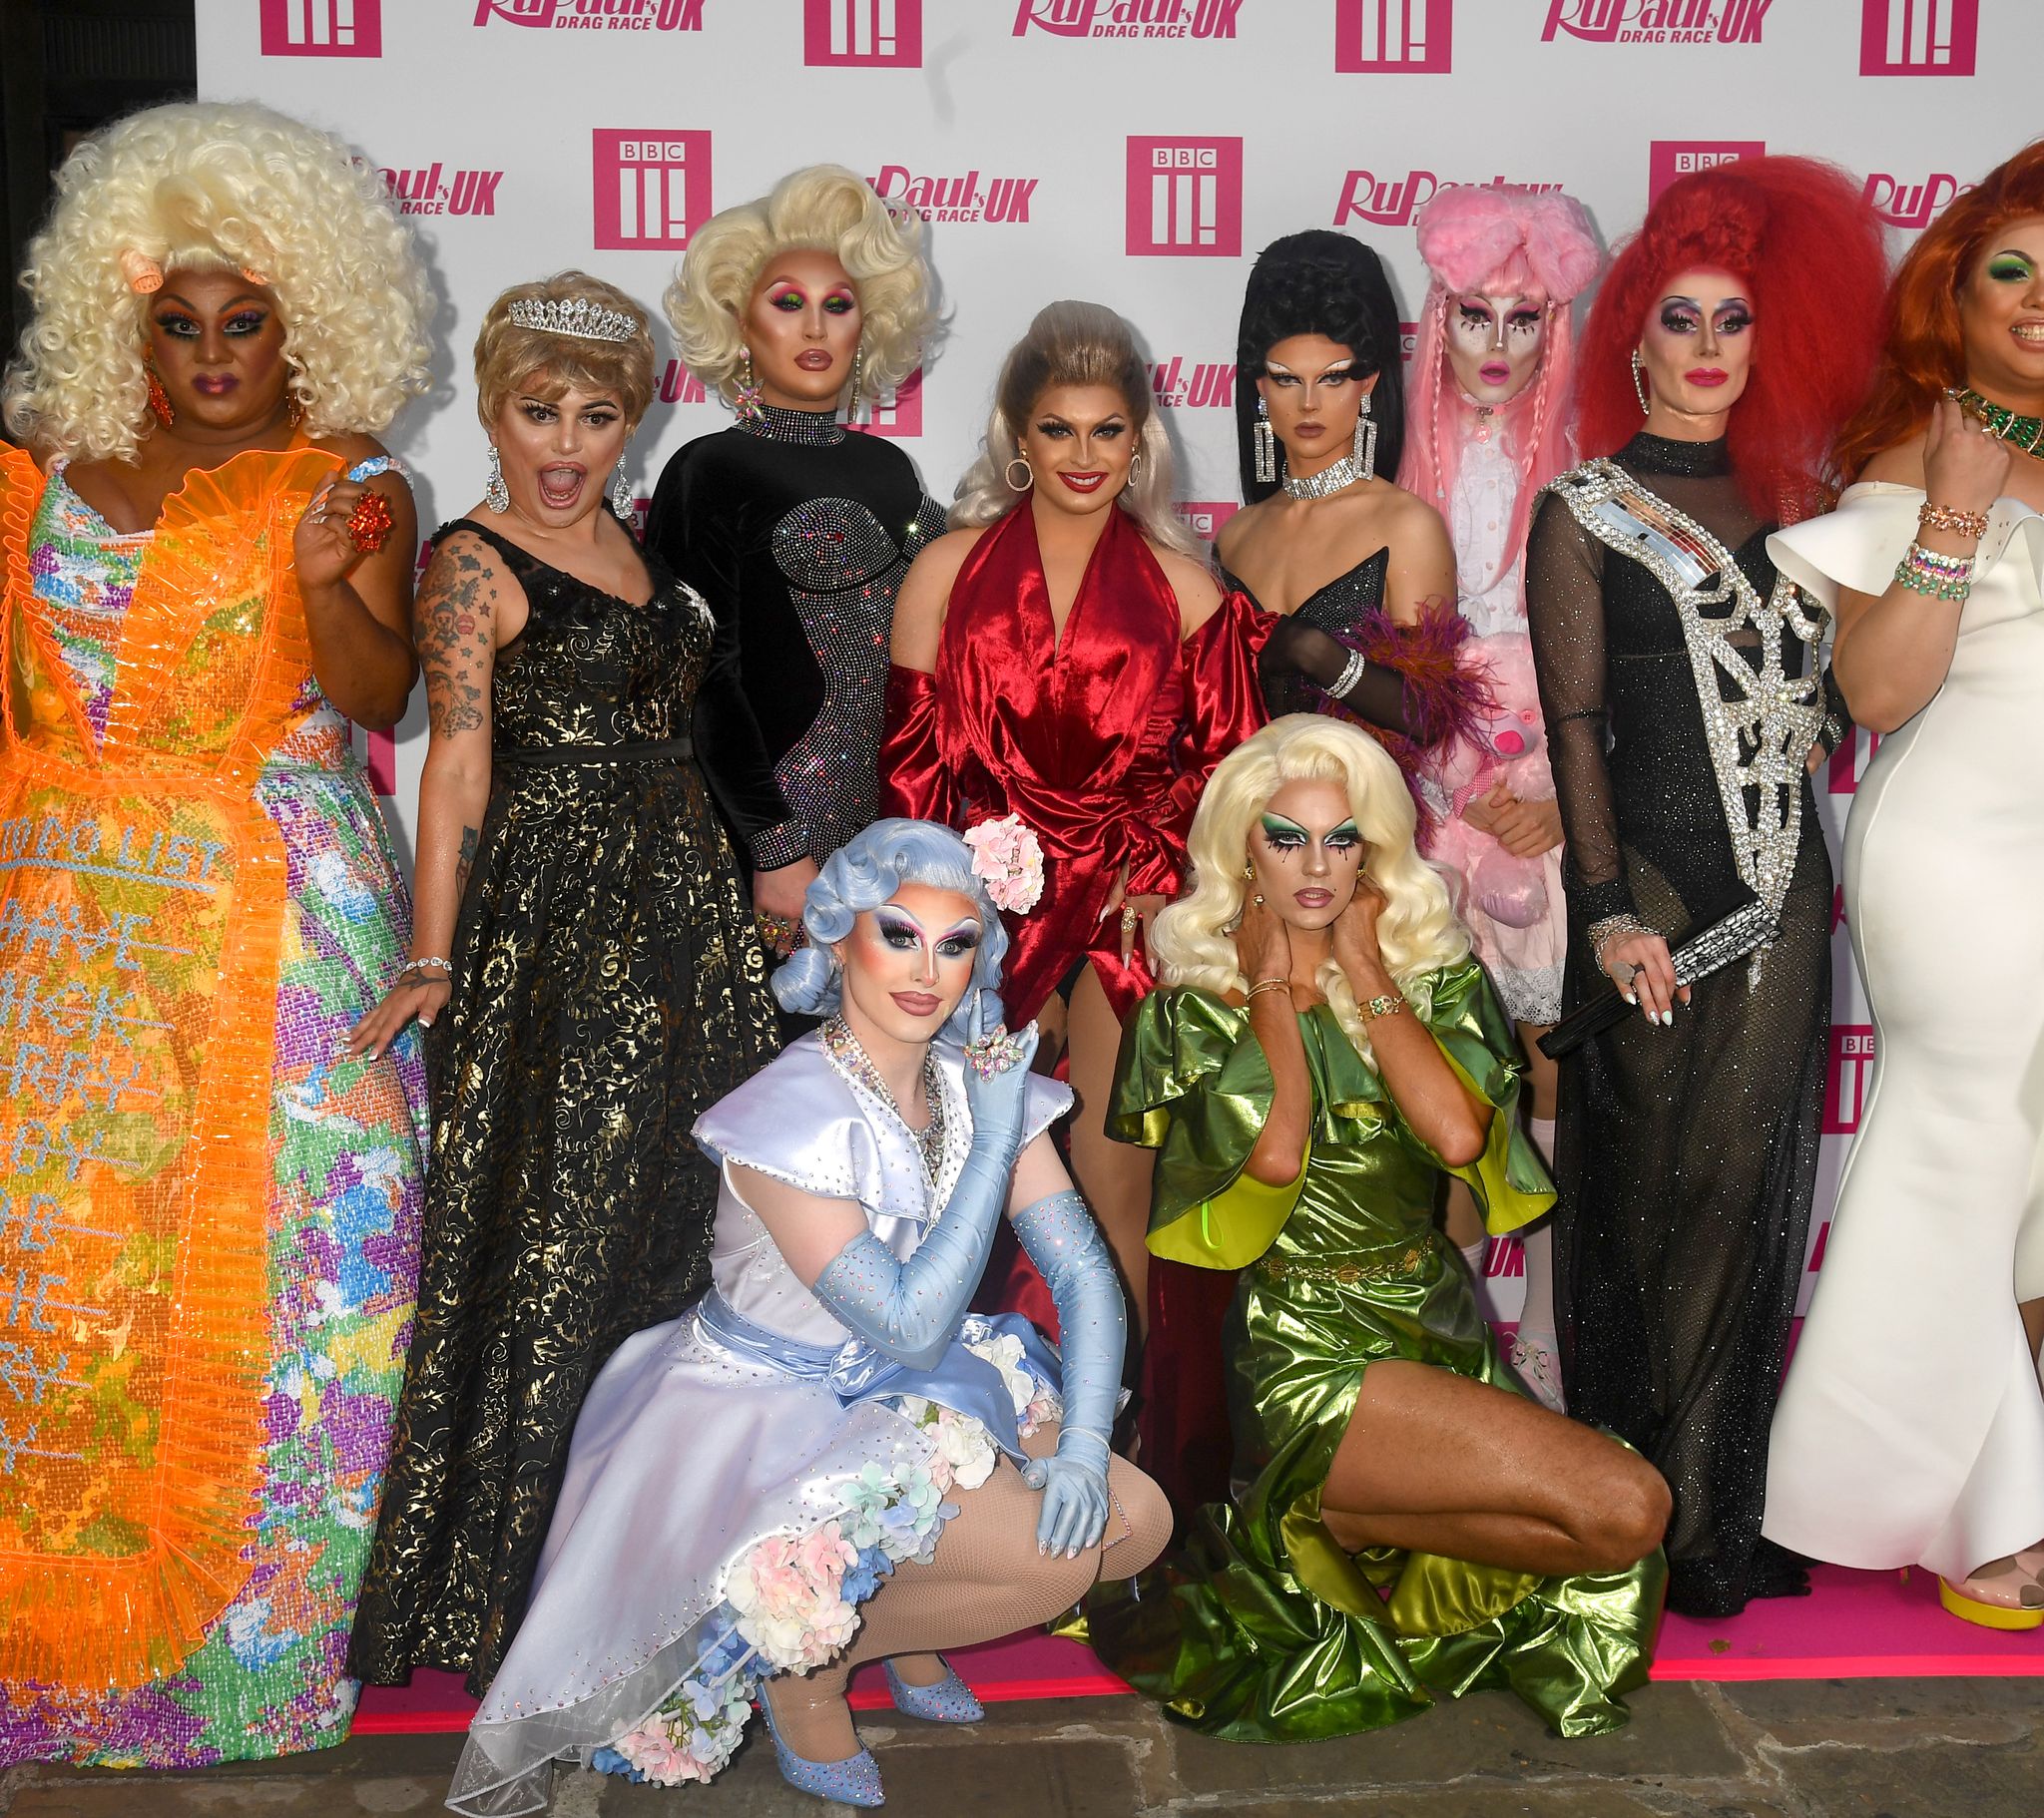 Drag evolution: 7 RuPaul's Drag Race queens breaking gender boundaries,  from trans male fan fave Gottmik and trans female newbie Kerri Colby, to  straight cisgender contestant Maddy Morphosis